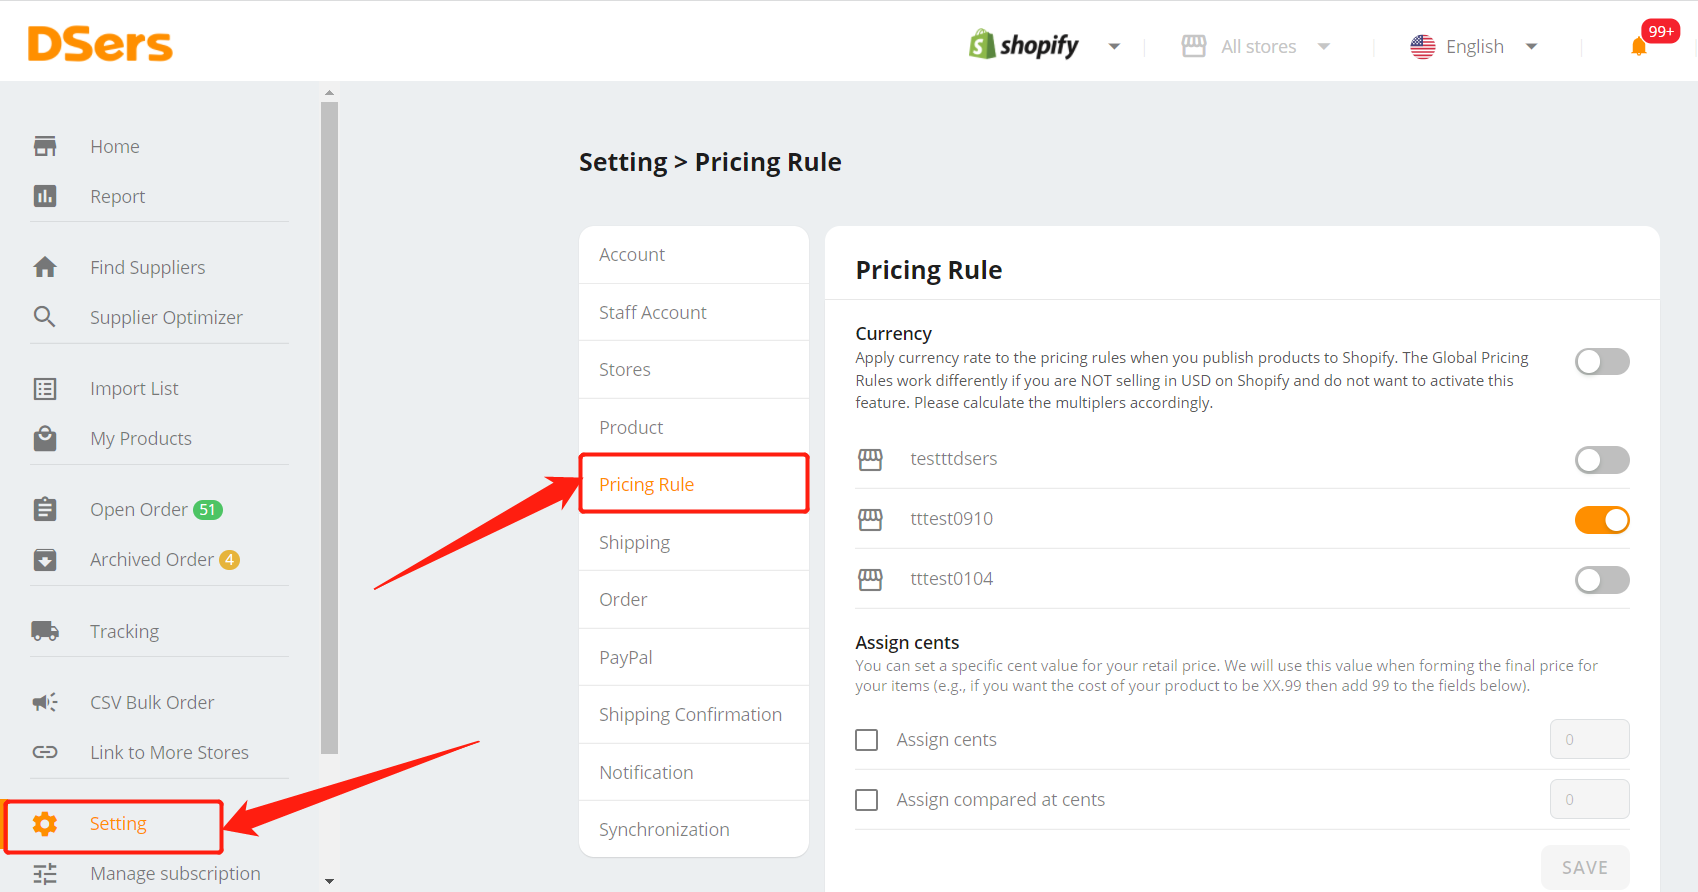 Standard Pricing Rule - Setting Pricing Rule - DSers